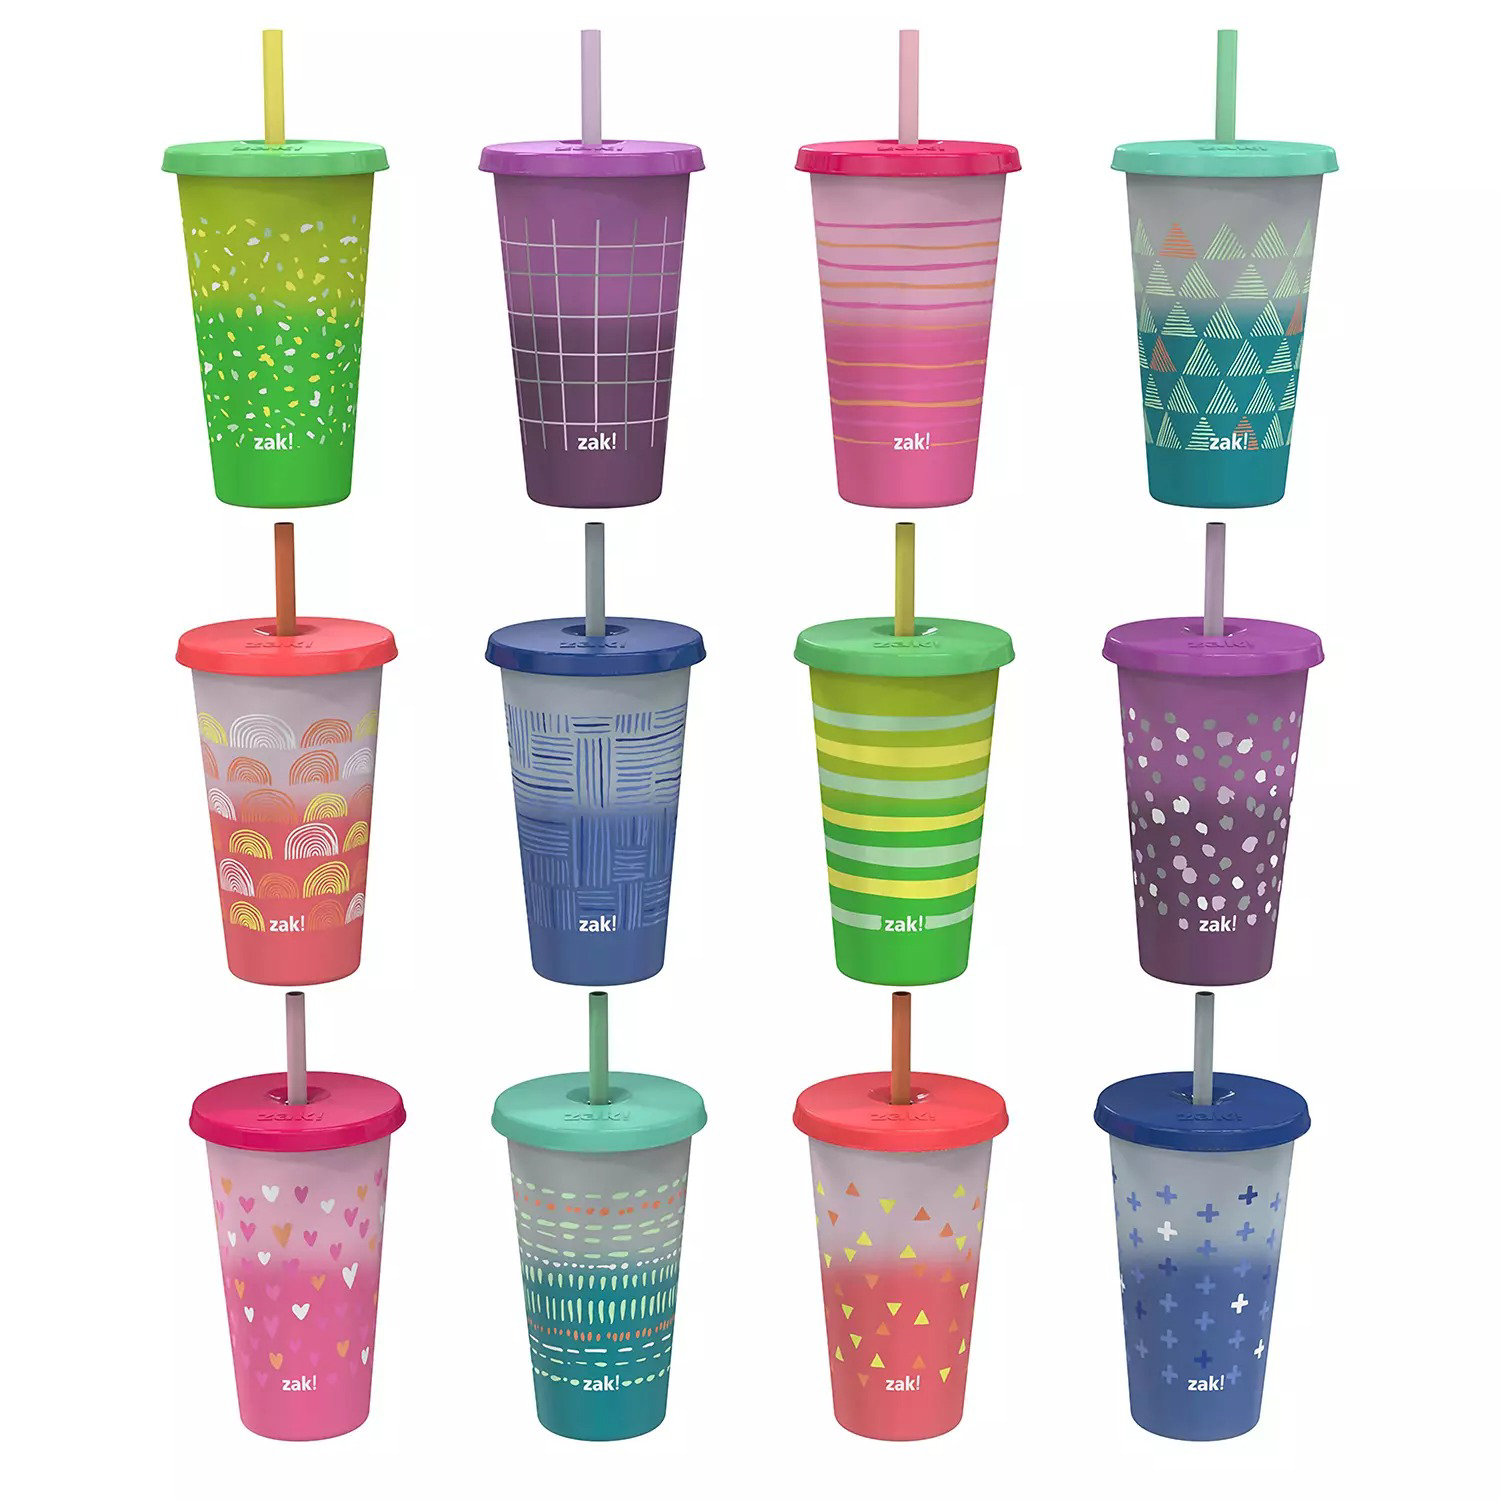 Do you use Zak straw cups? Zak tumblers are one of my favorite cups.